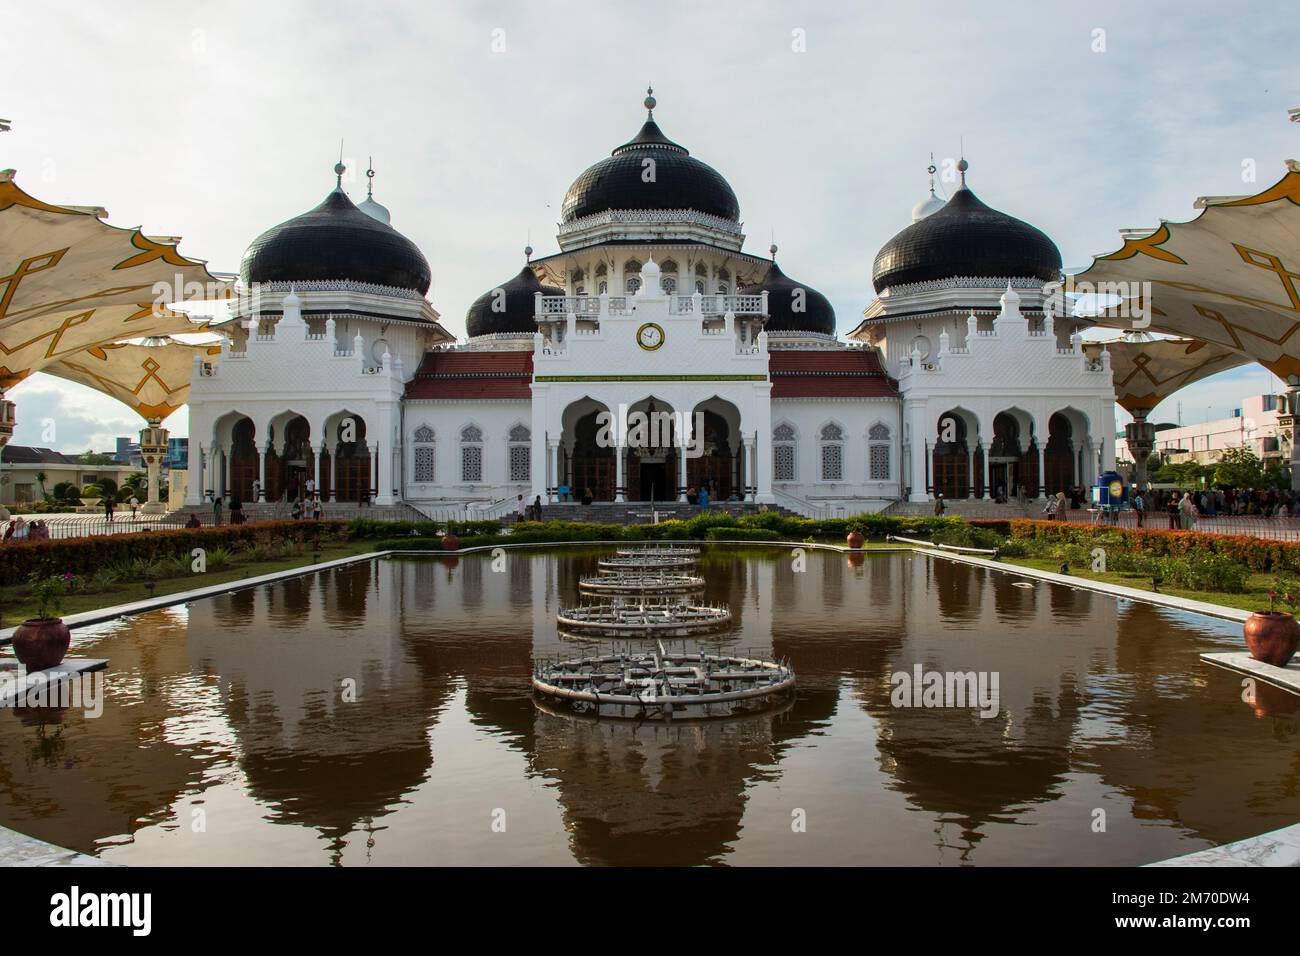 Baiturrahman Grand Mosque, this mosque is a historic mosque in Aceh province, this mosque was founded in 1612 AD. Stock Photo